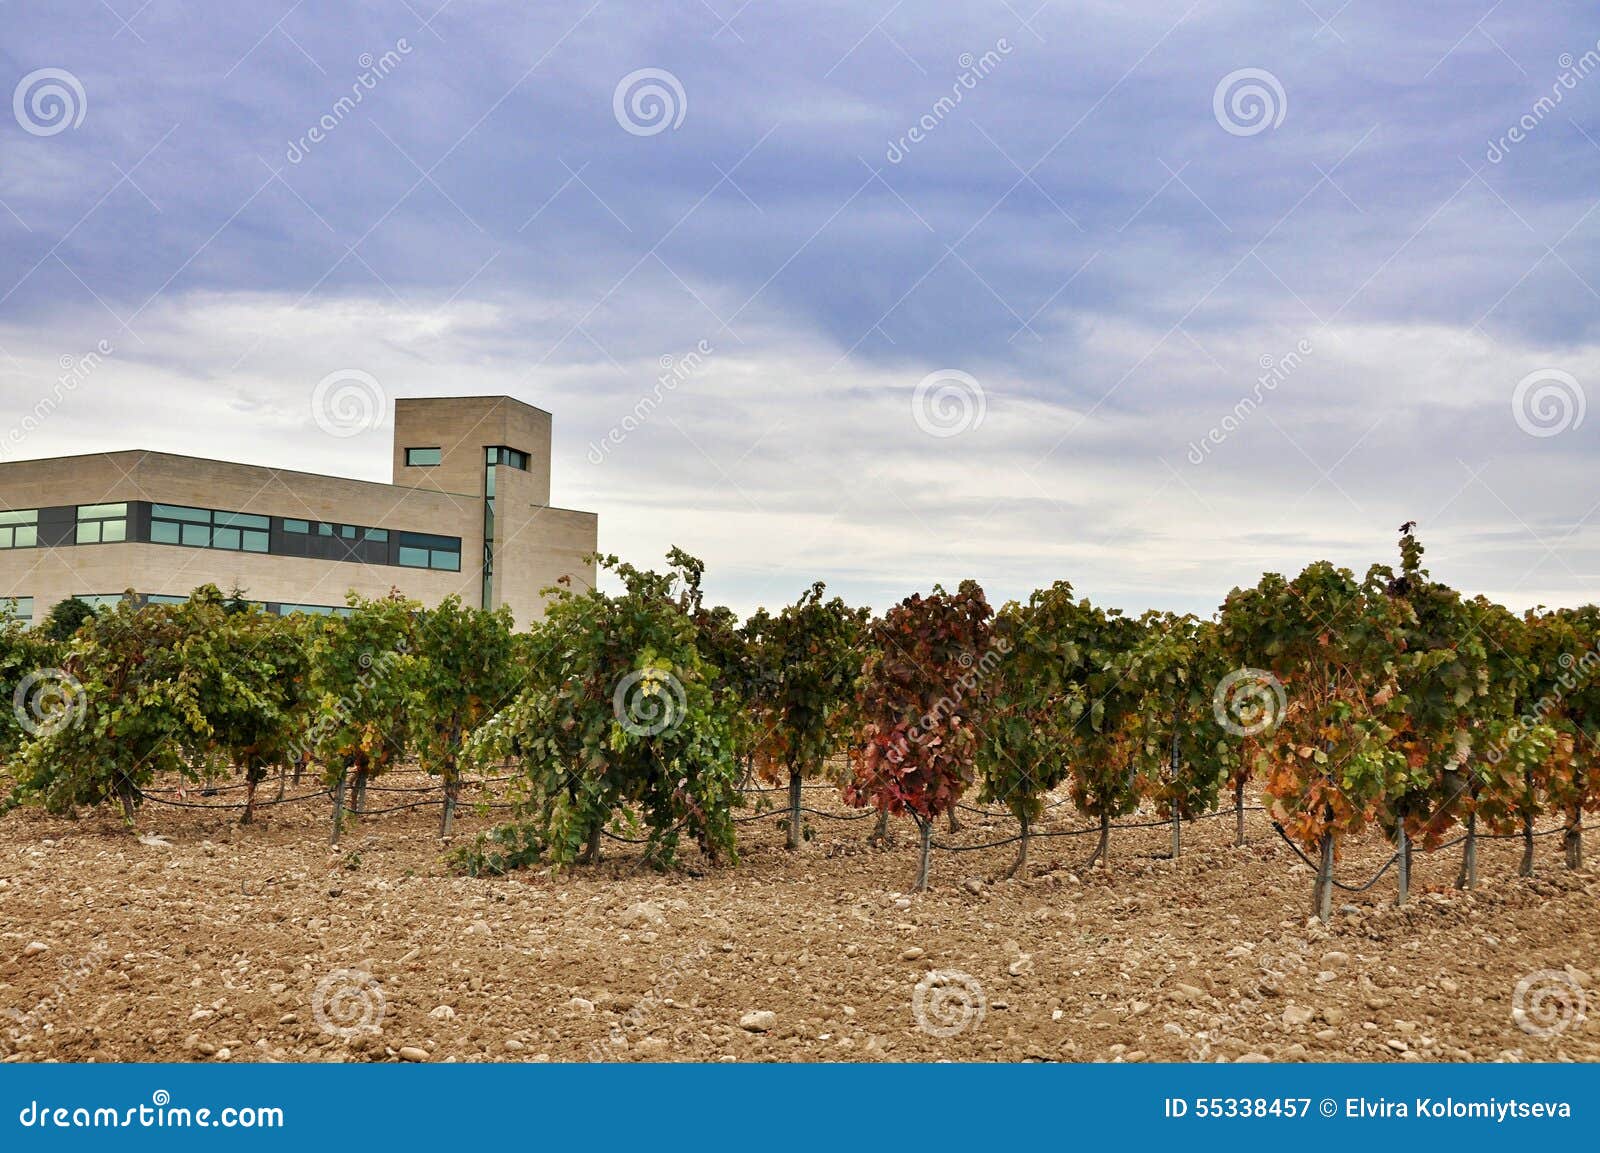 plant for making wine and jamon in olite